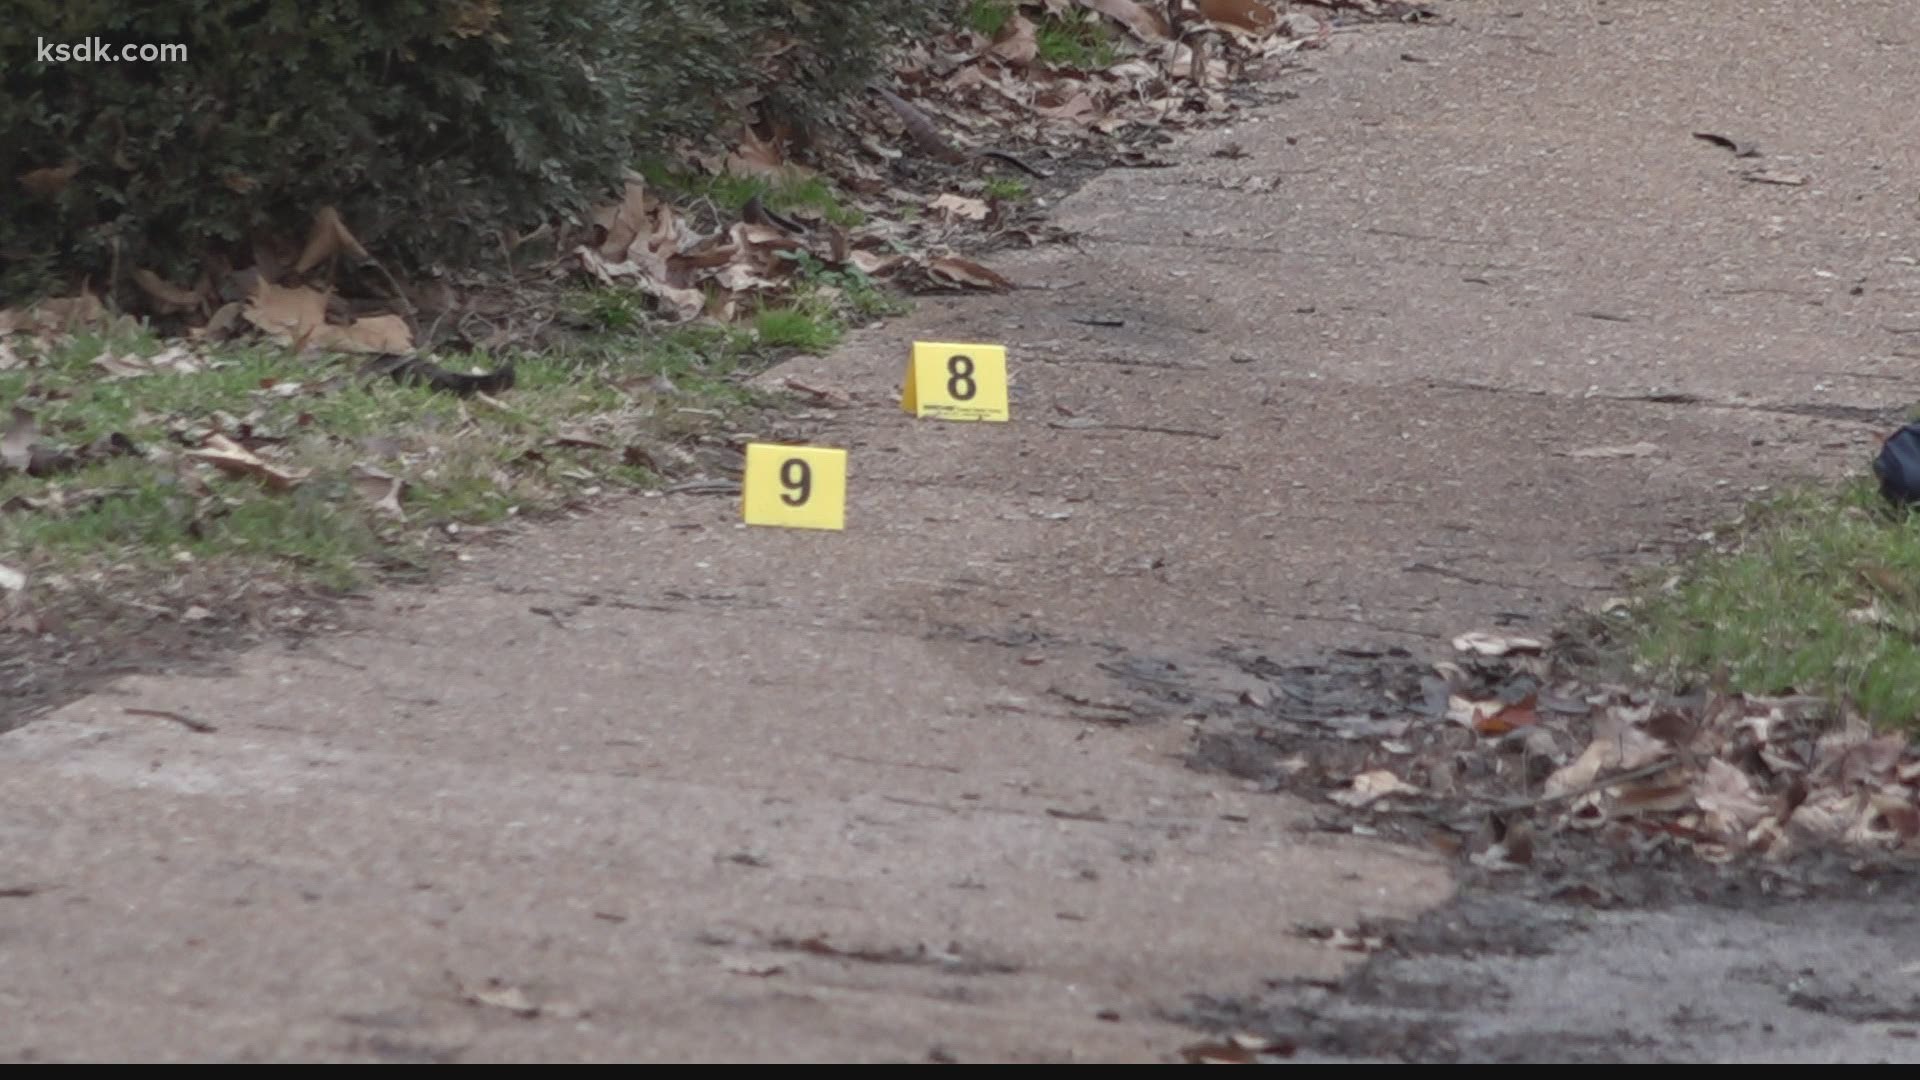 The shooting happened Sunday afternoon along Spencer Avenue